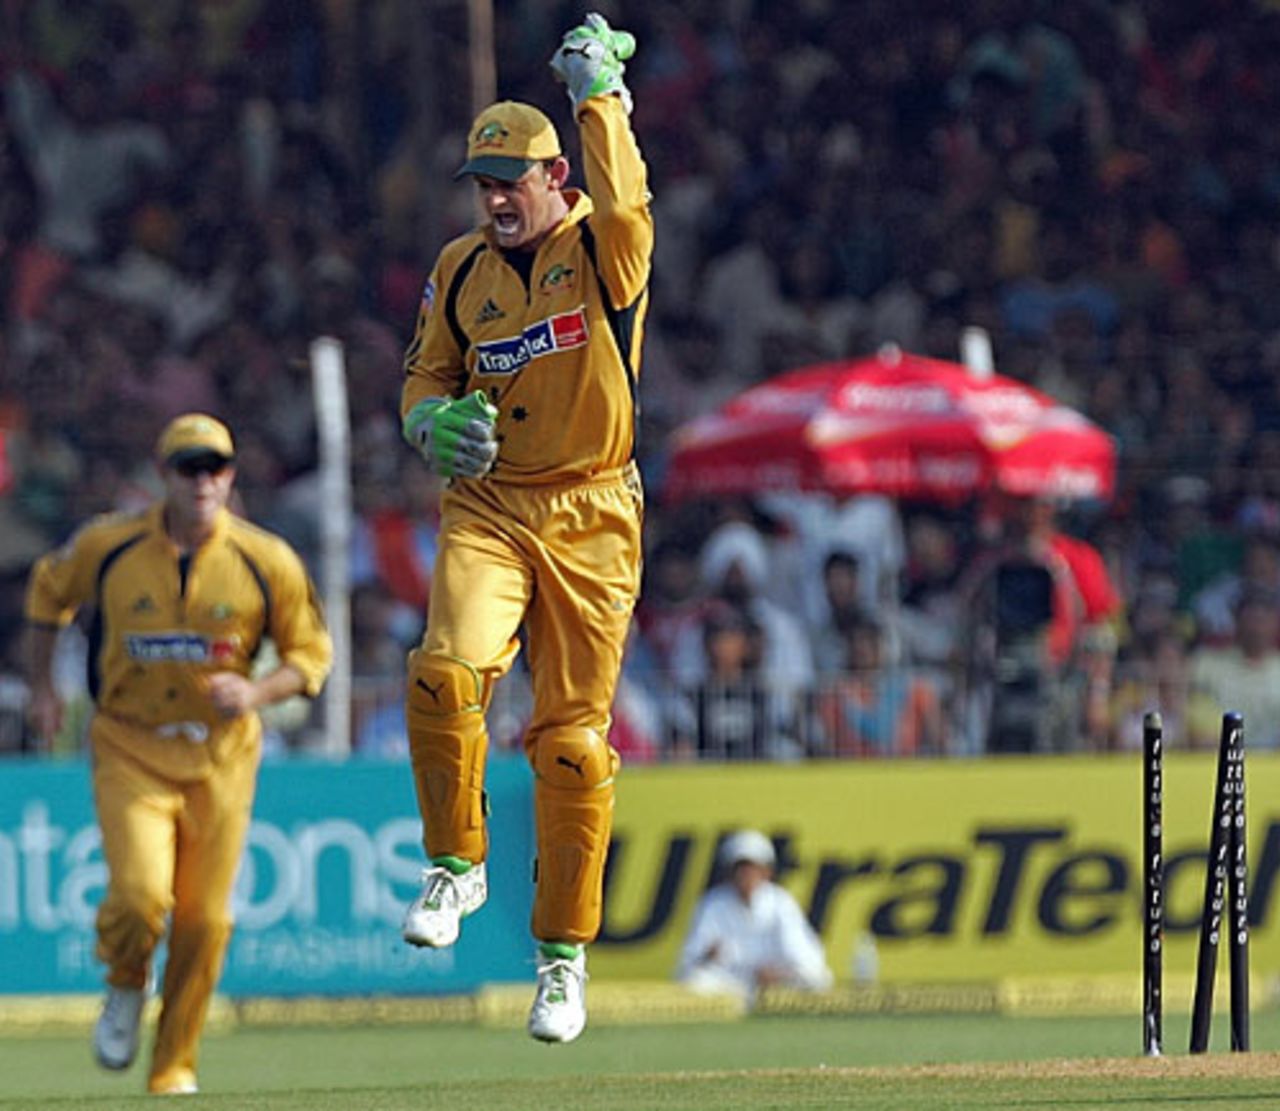 Adam Gilchrist runs out Sourav Ganguly in the first over, India v Australia, 5th ODI, Vadodara, October 11, 2007